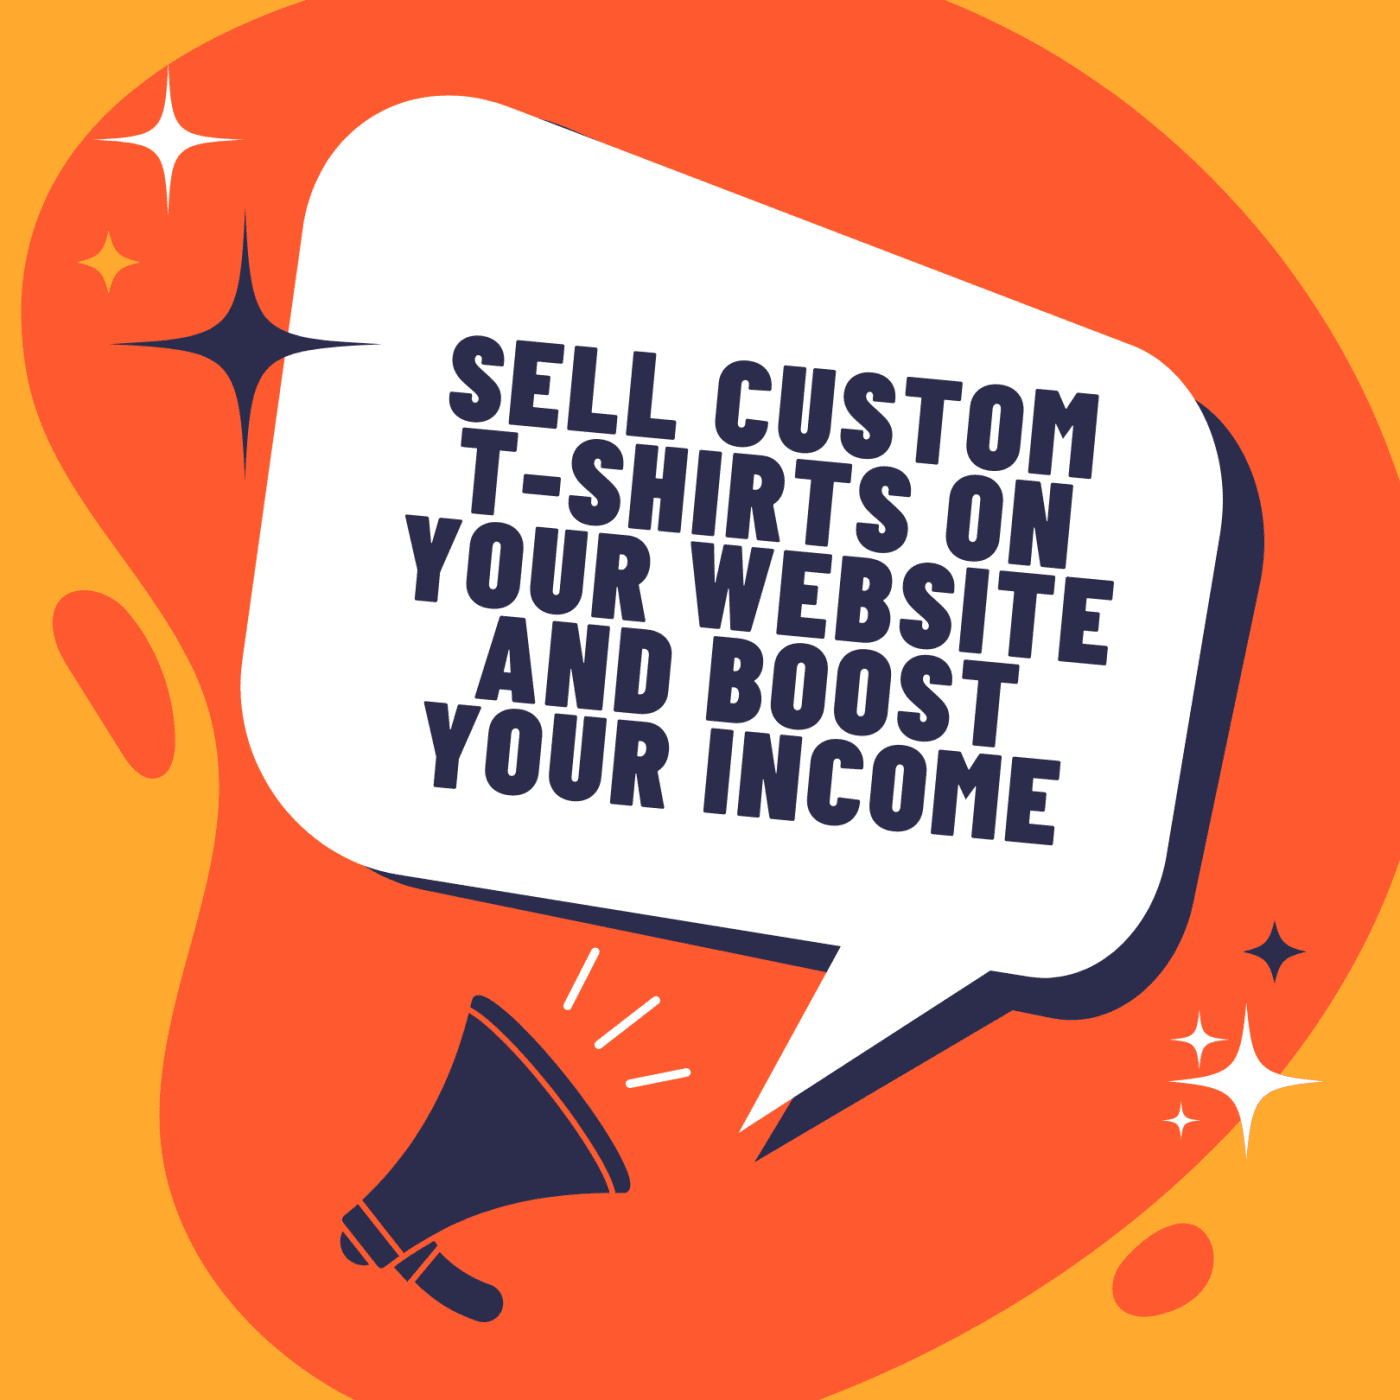 Sell-Custom-T-Shirts-on-Your-Website-and-Boost-Your-Income, custom t-shirts, tshirt printing